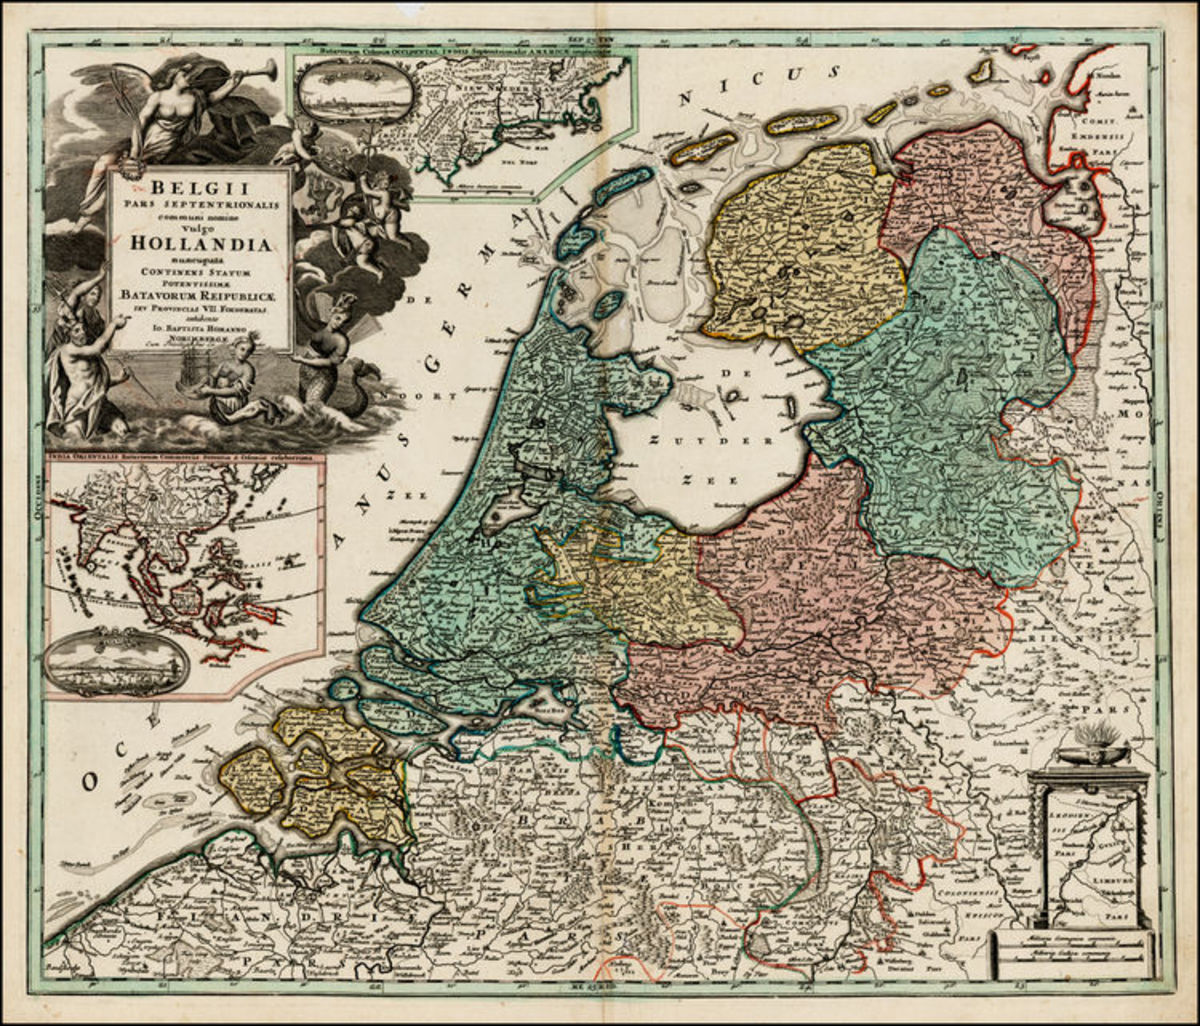 The French Language in the Early Modern Netherlands